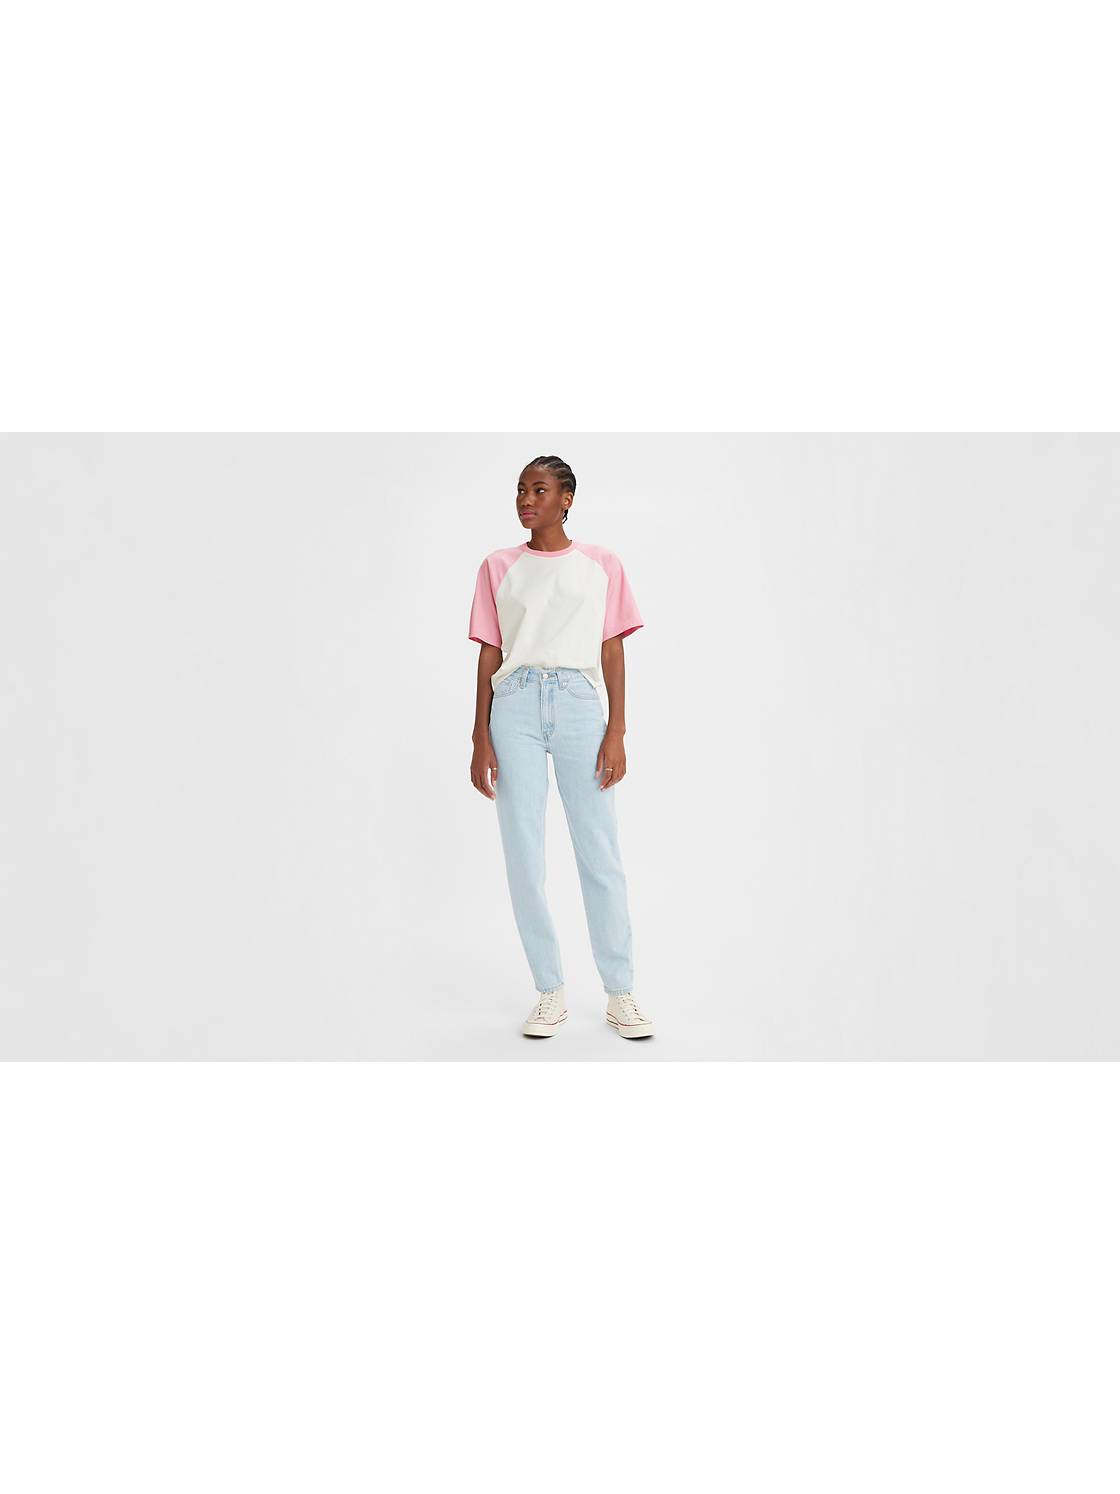 Levi's Original Red Tab Women's High-Waisted Mom Jeans 